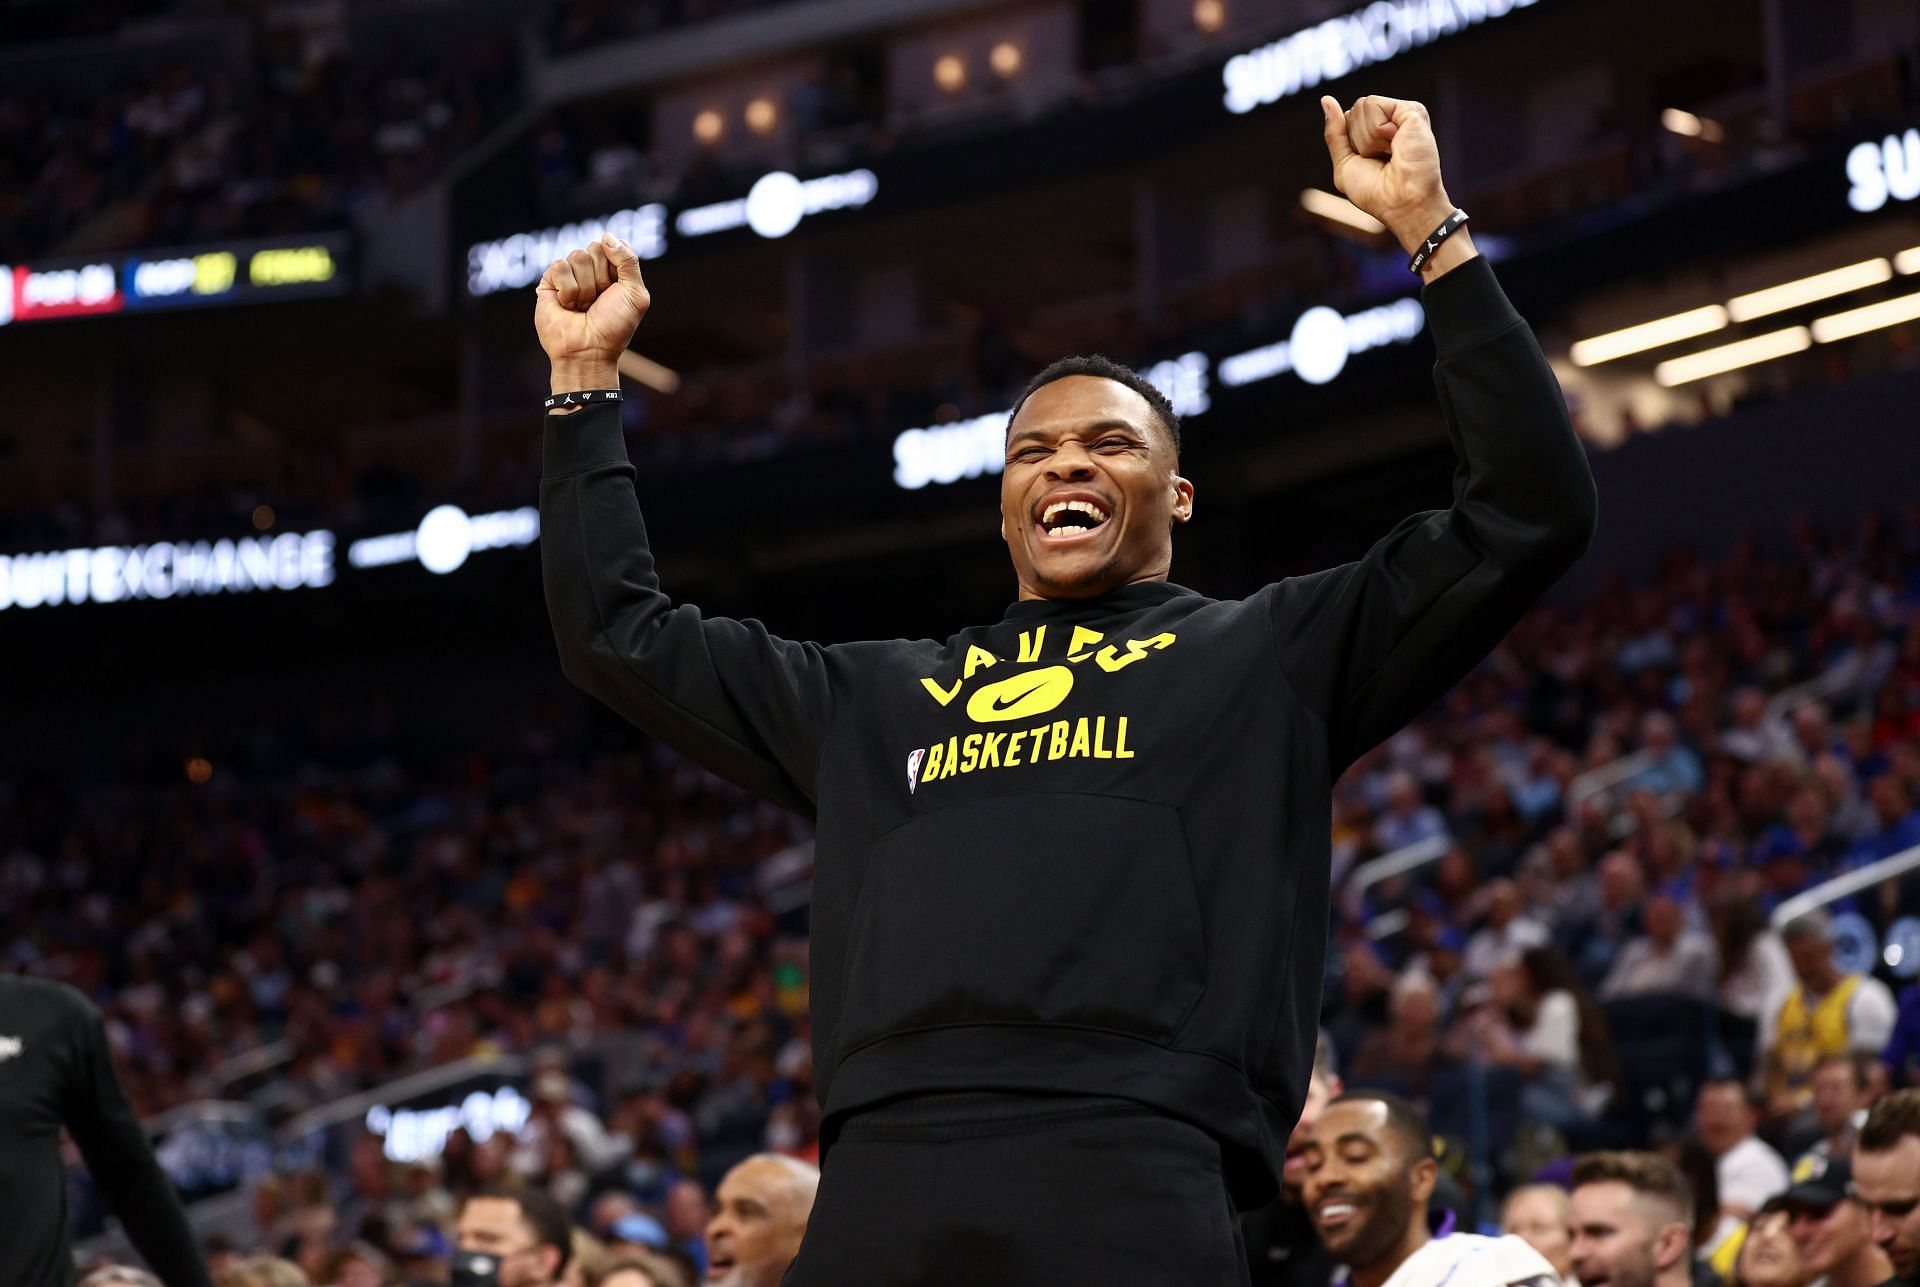 Russell Westbrook No. 0 of the LA Lakers cheers on his team during a game Golden State Warriors.